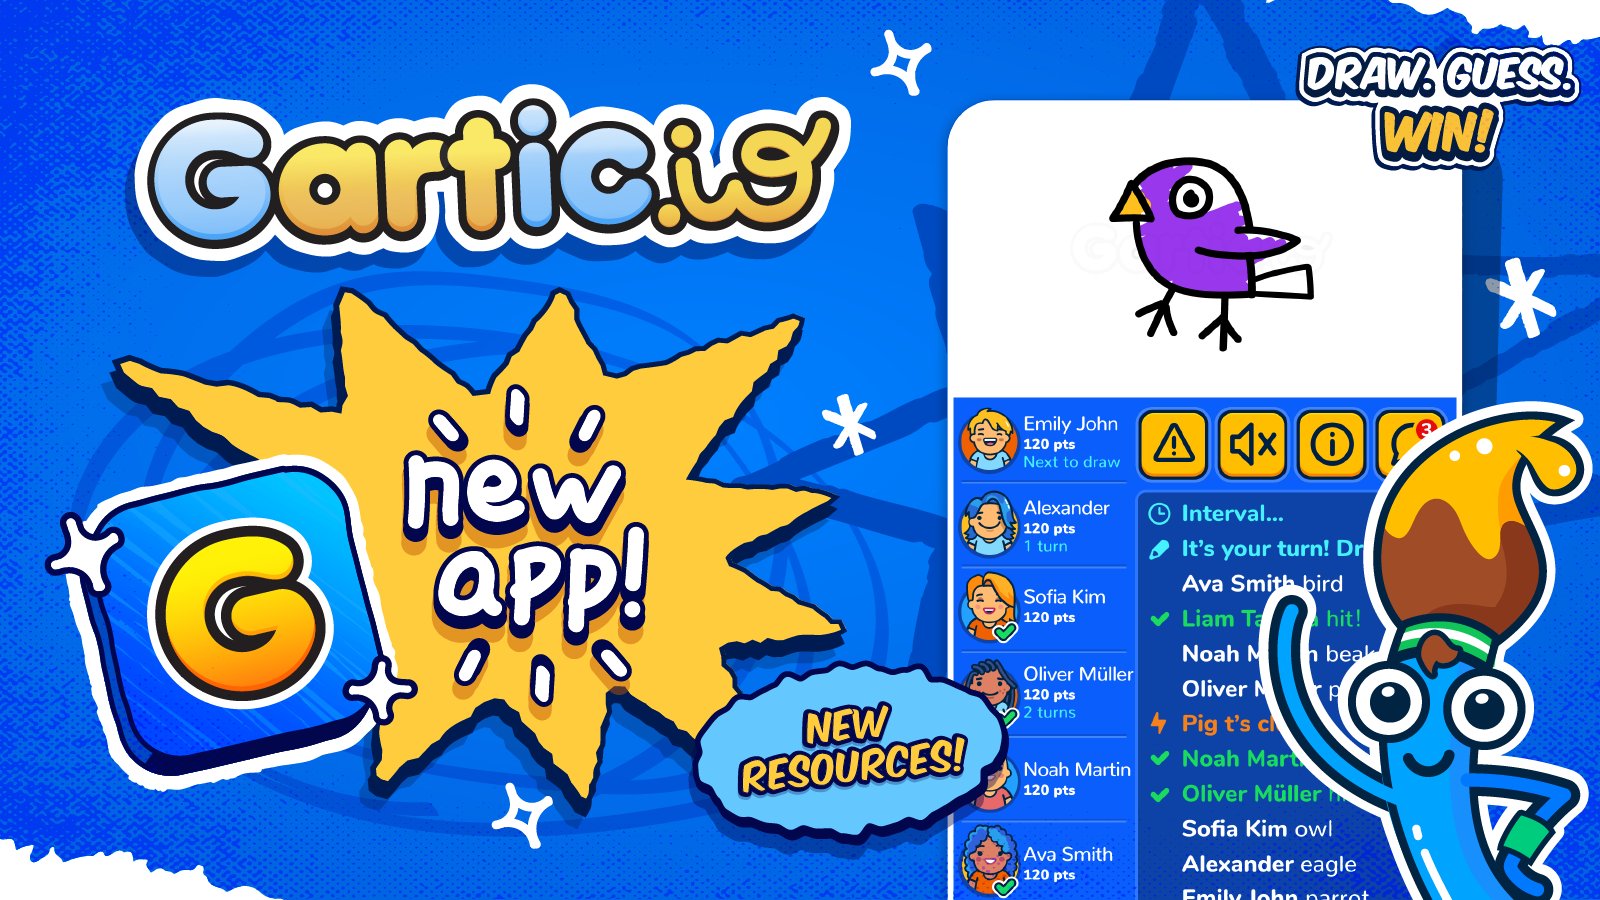 Playing Gartic Phone Live come Join and hang out. #garticphone